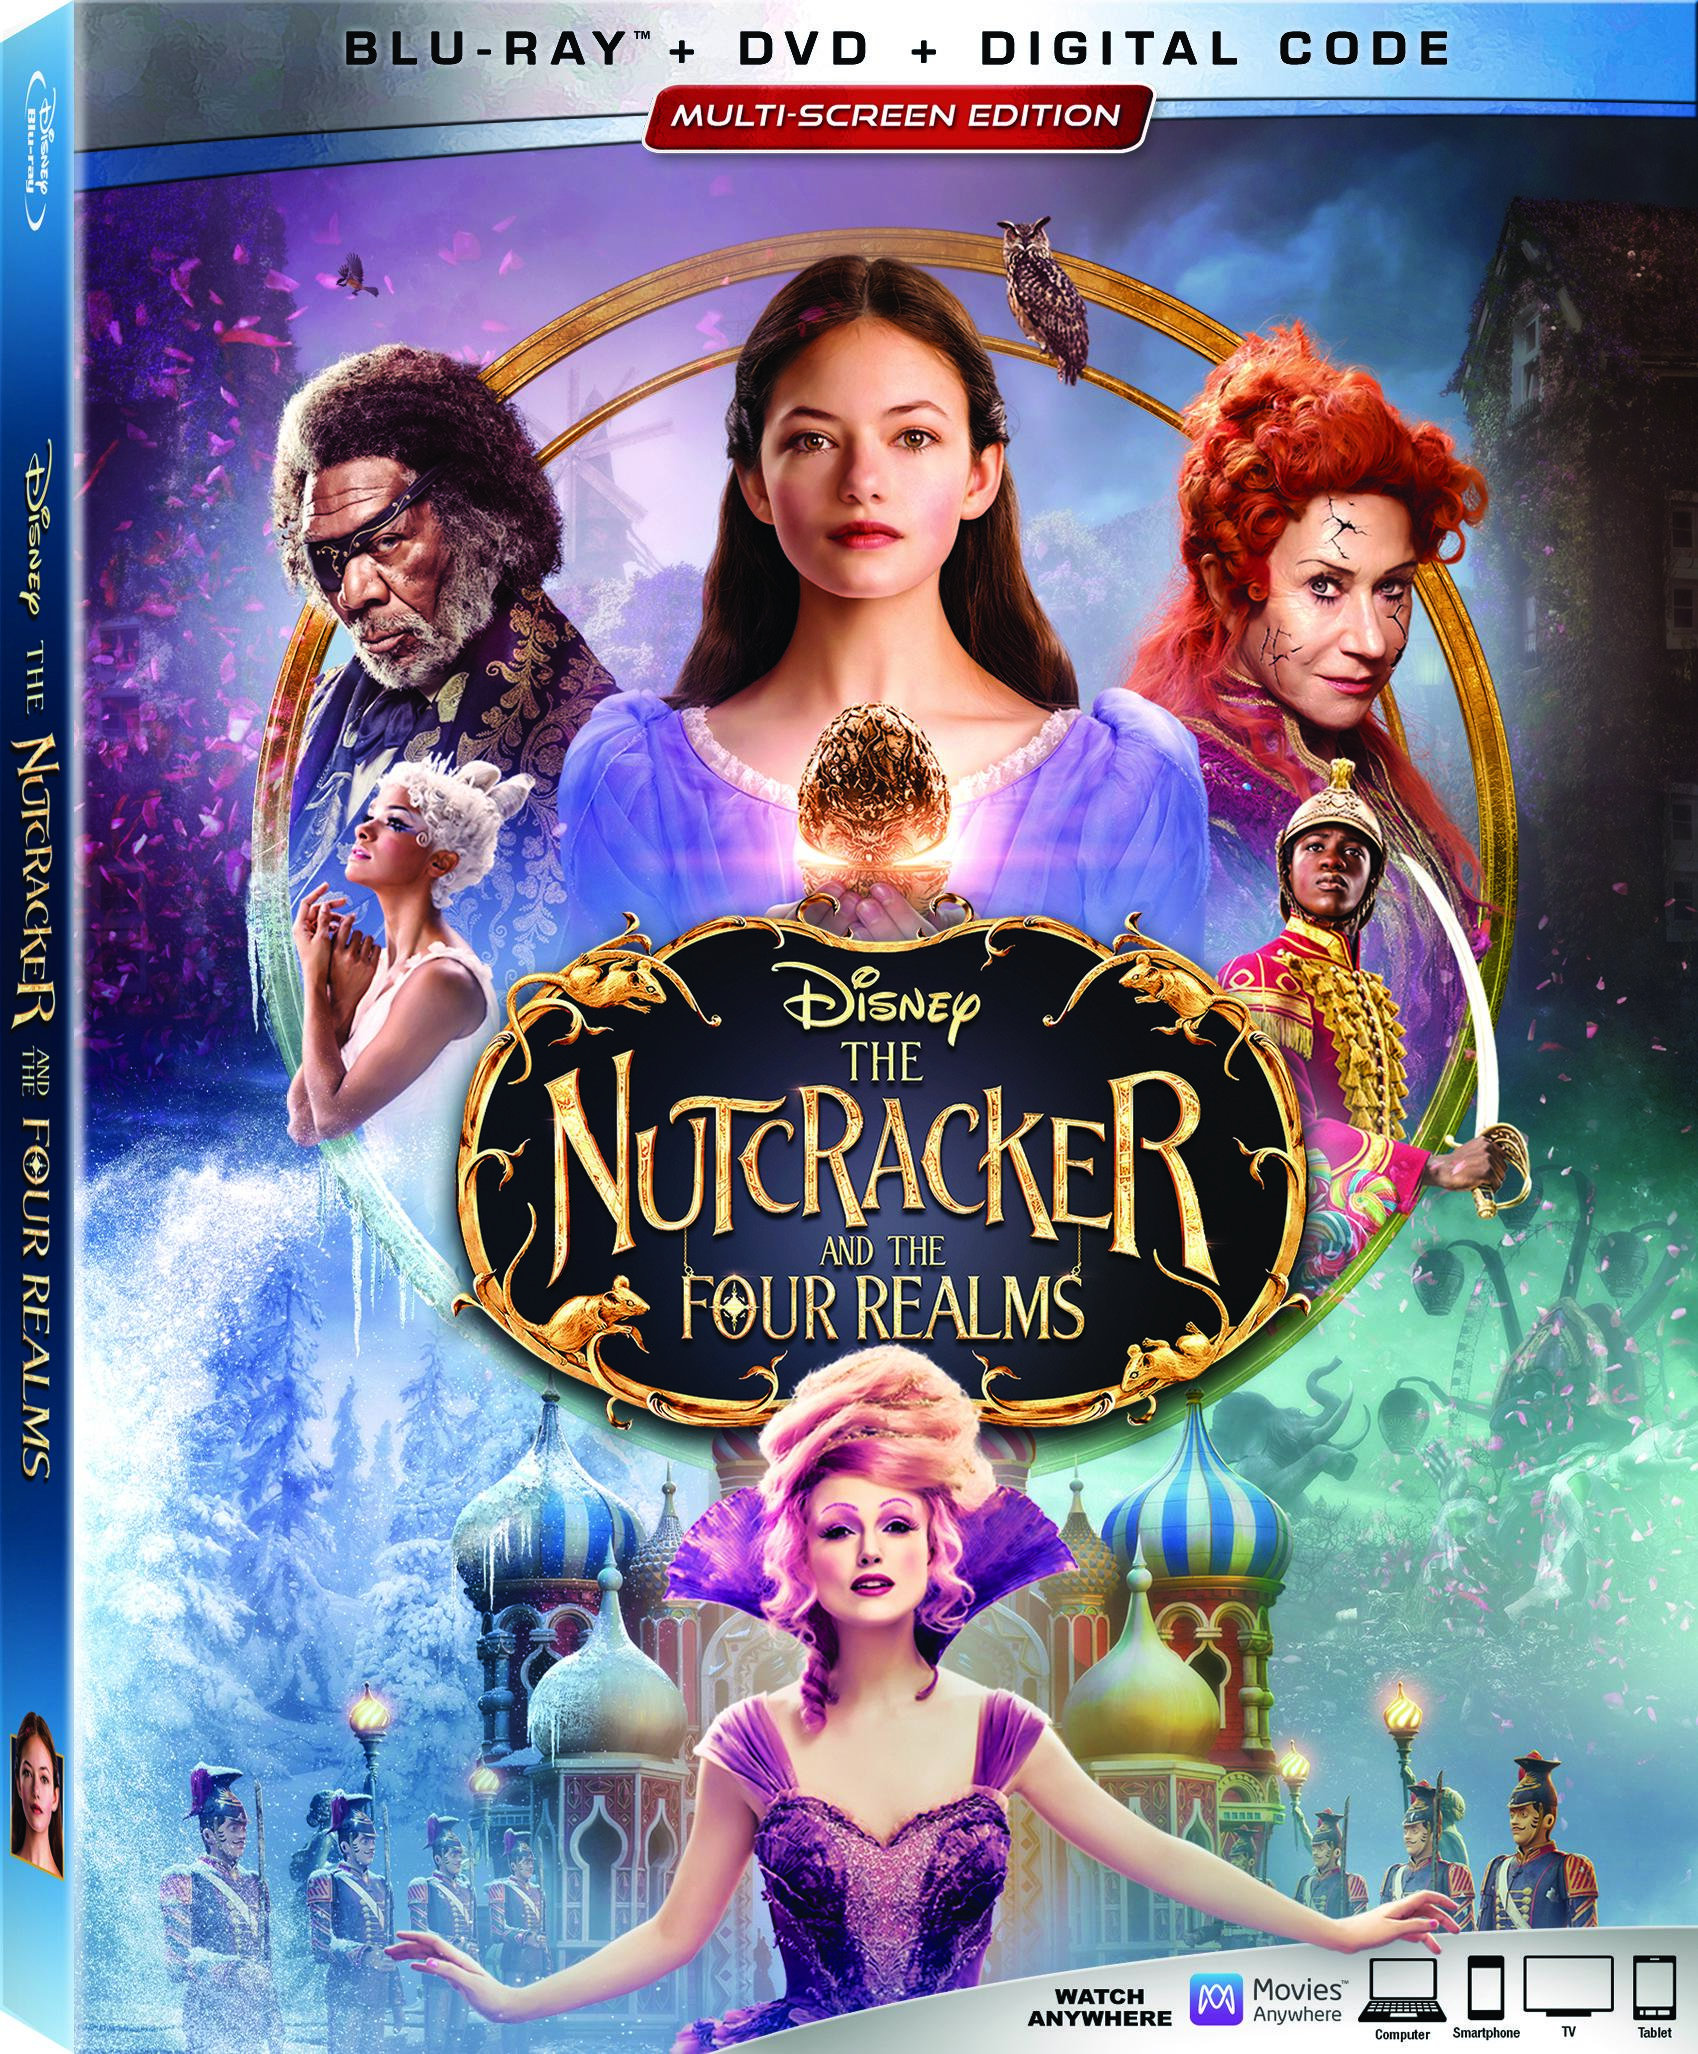 The Nutcracker And The Four Realms Blu-Ray Combo Pack cover (Walt Disney Studios Home Entertainment)